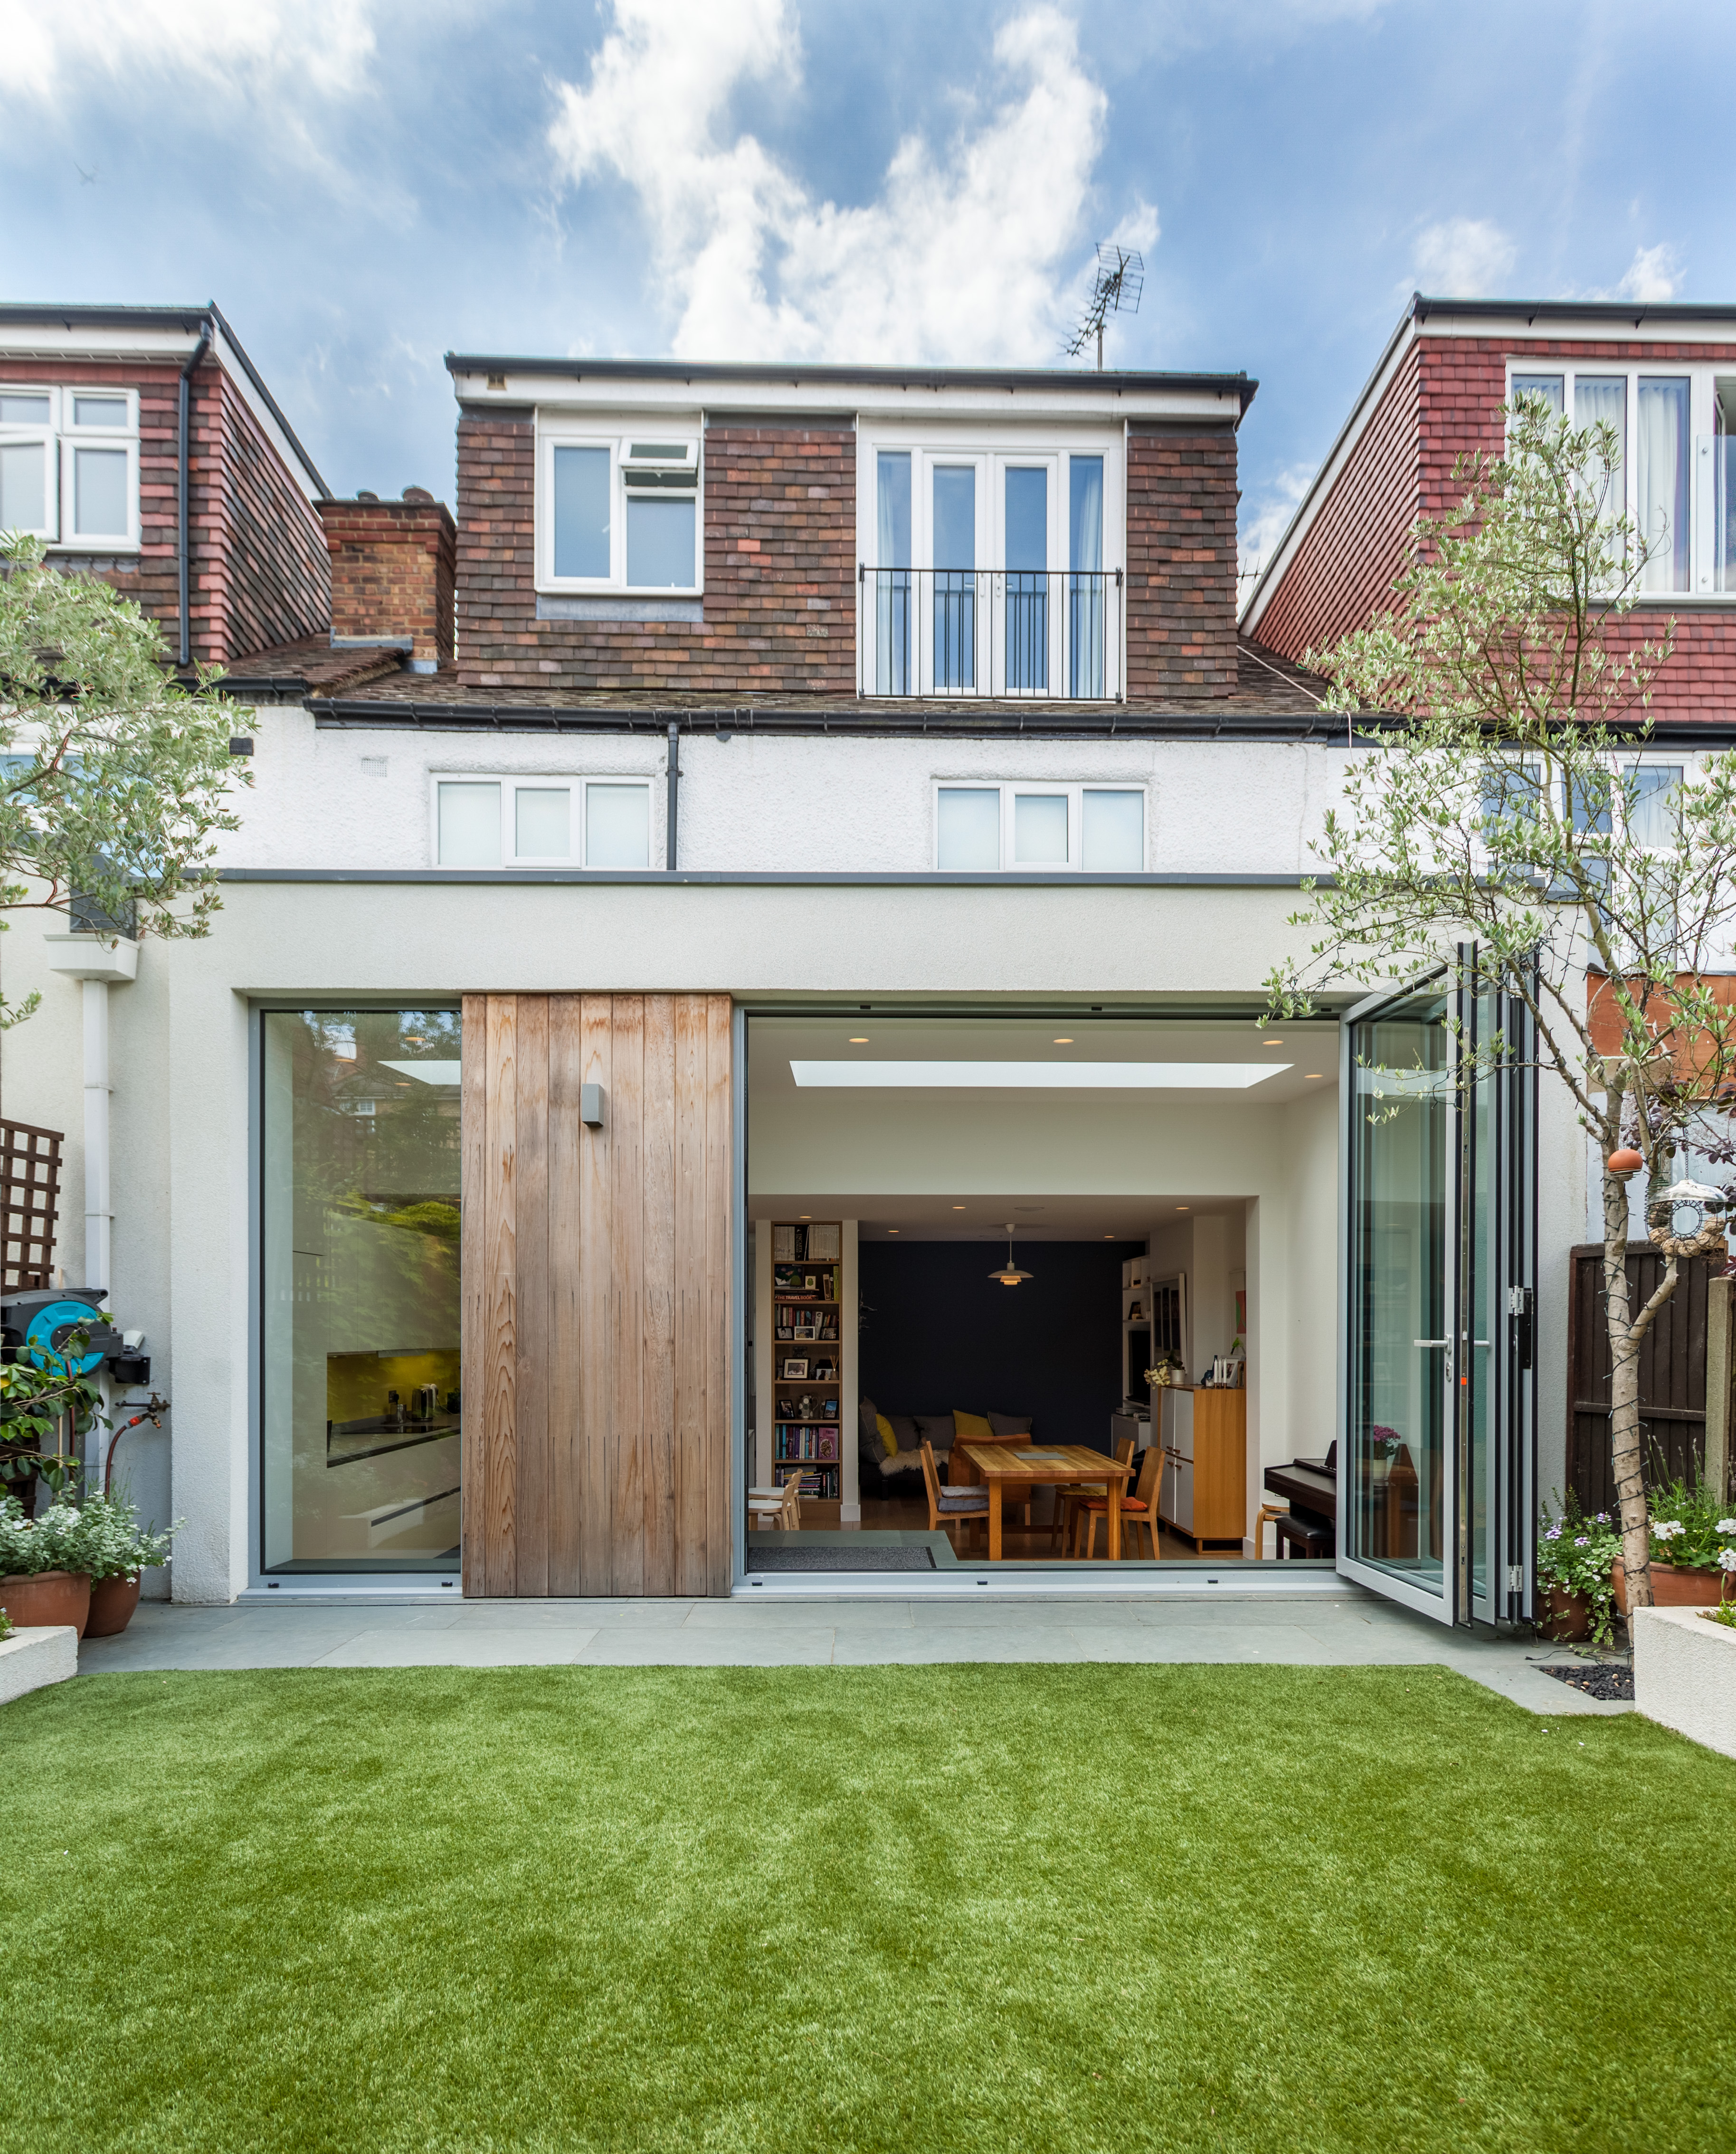 </p> <p>Find your ideal home design pro on designfor-me.com - get matched and see who's interested in your home project. Click image to see more inspiration from our design pros</p> <p>Design by Phil, architect from Haringey, London</p> <p>#architecture #homedesign #modernhomes #homeinspiration #extensions #extensiondesign #extensioninspiration #extensionideas #houseextension #bifolddoors #bifolds </p> <p>